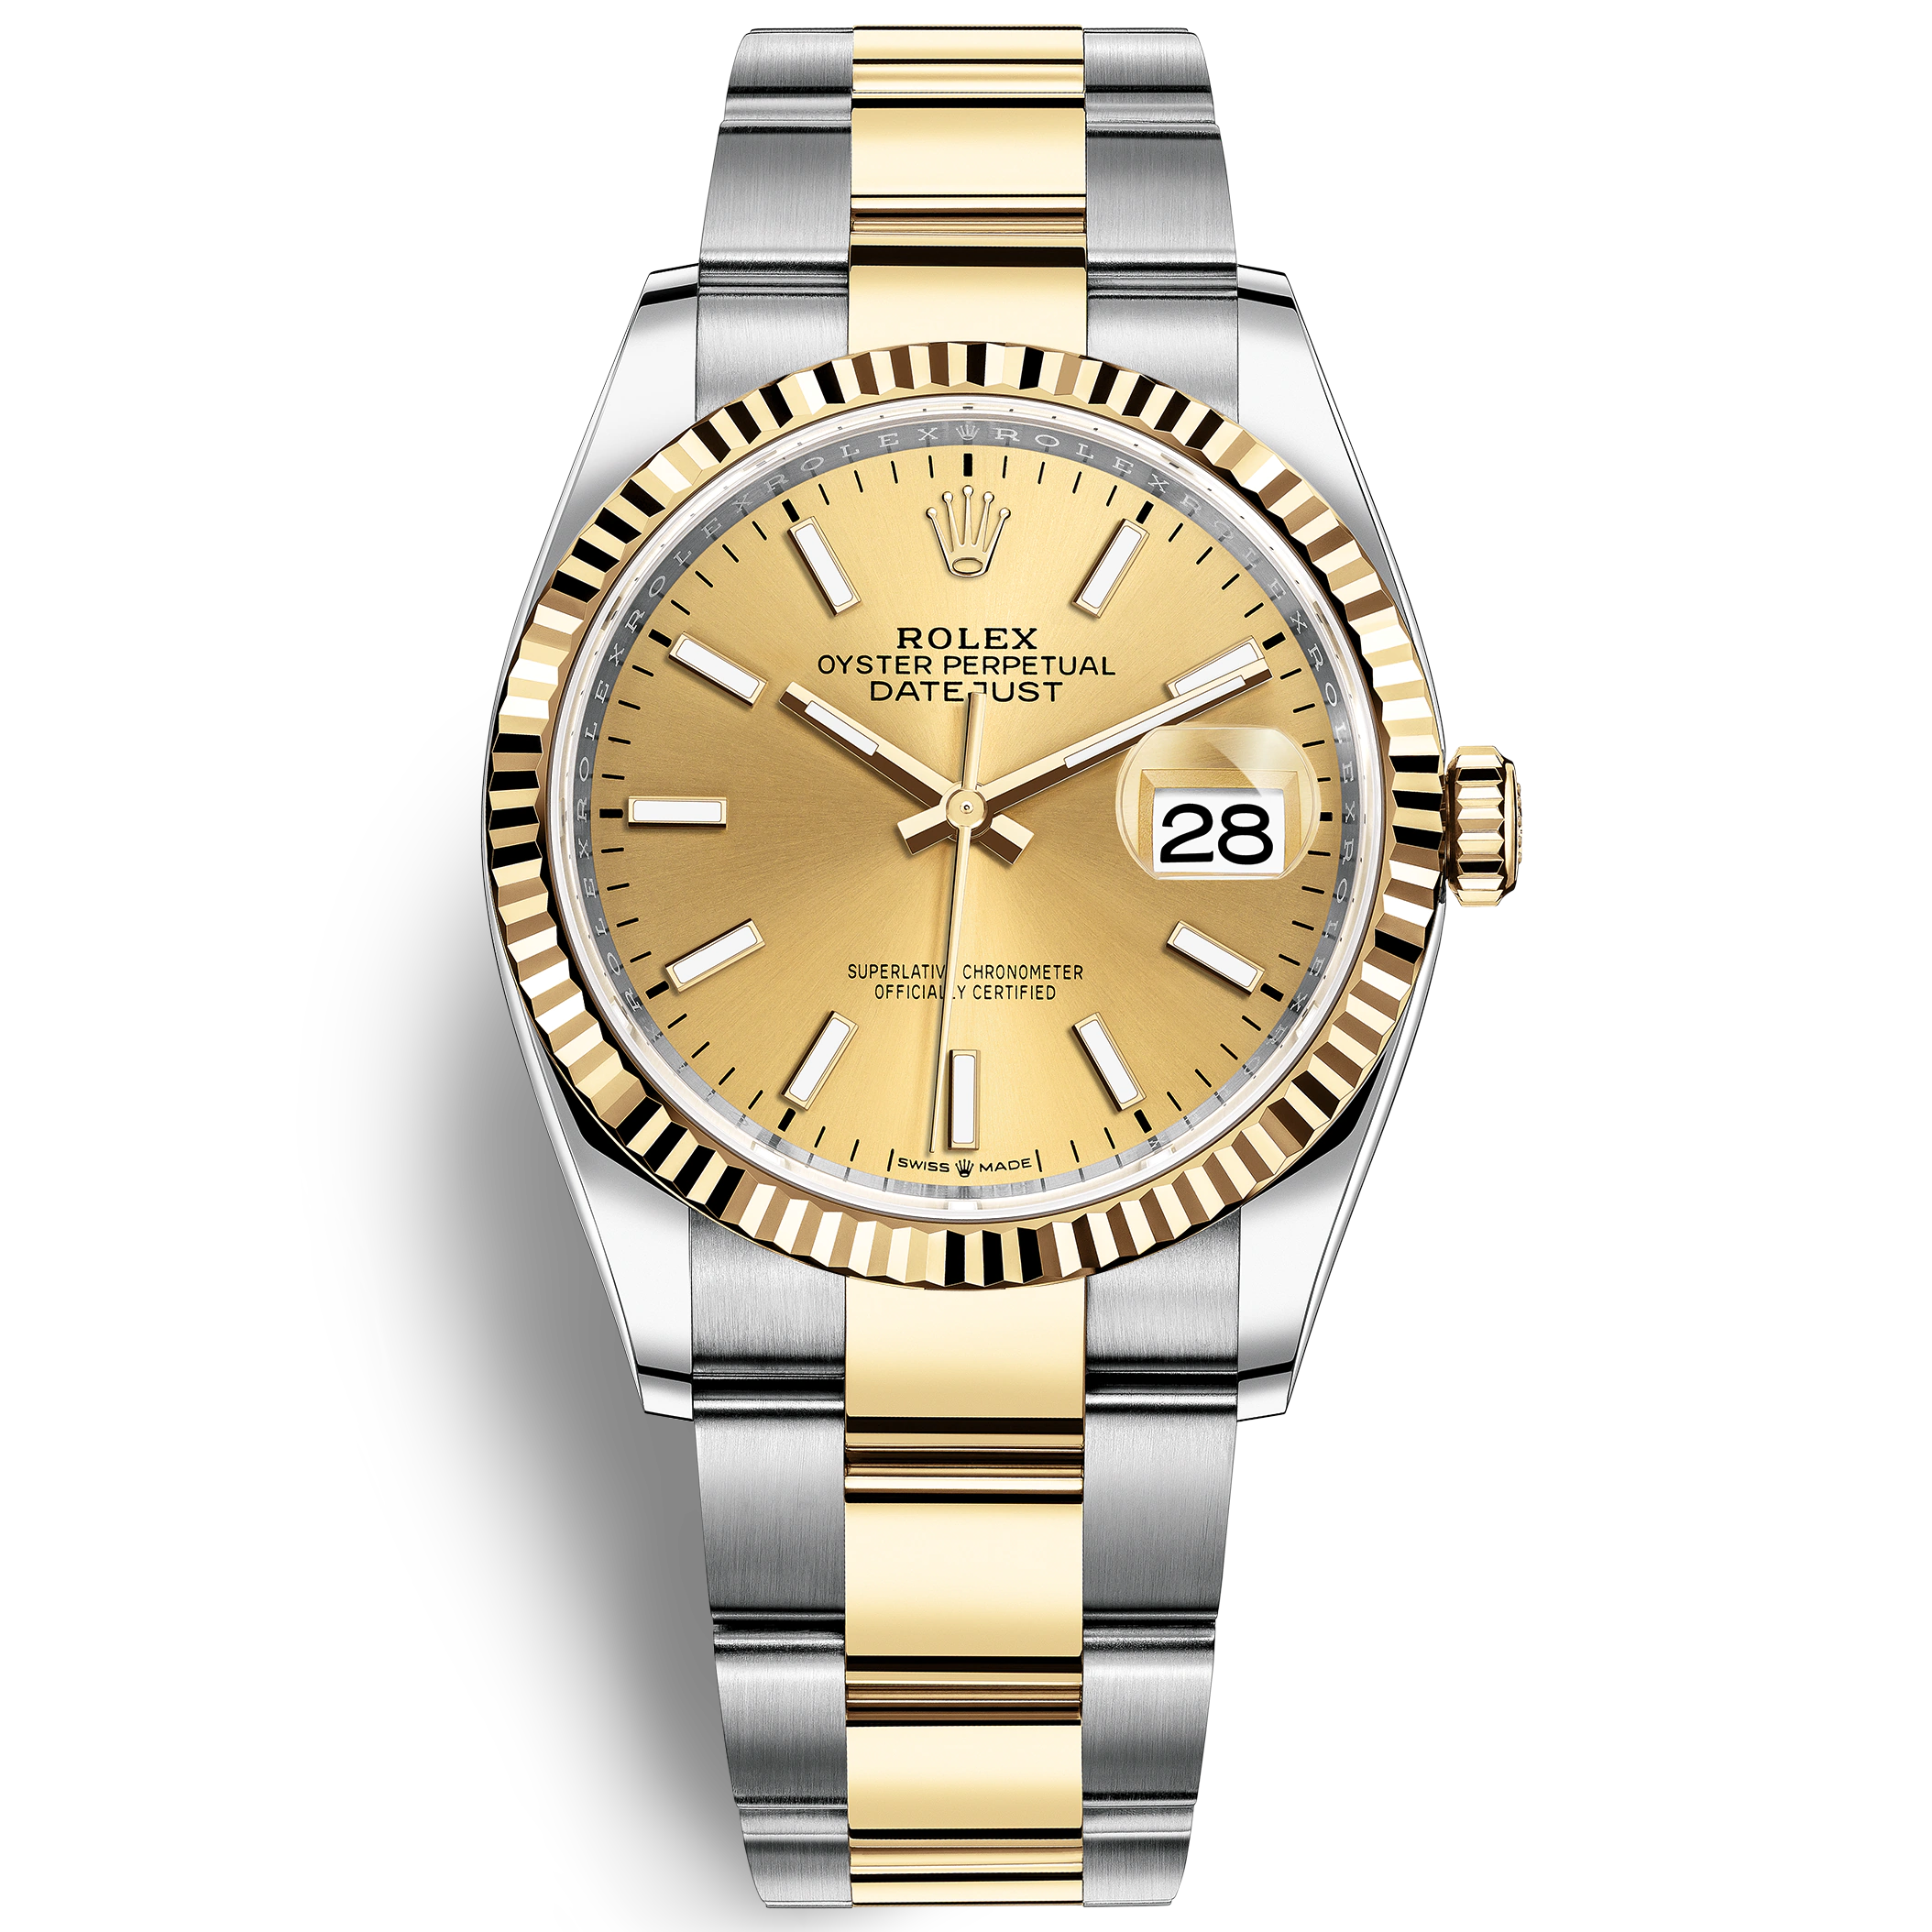 Rolex Datejust 36 126233 Mặt Số Vàng Champagne Dây Đeo Oyster